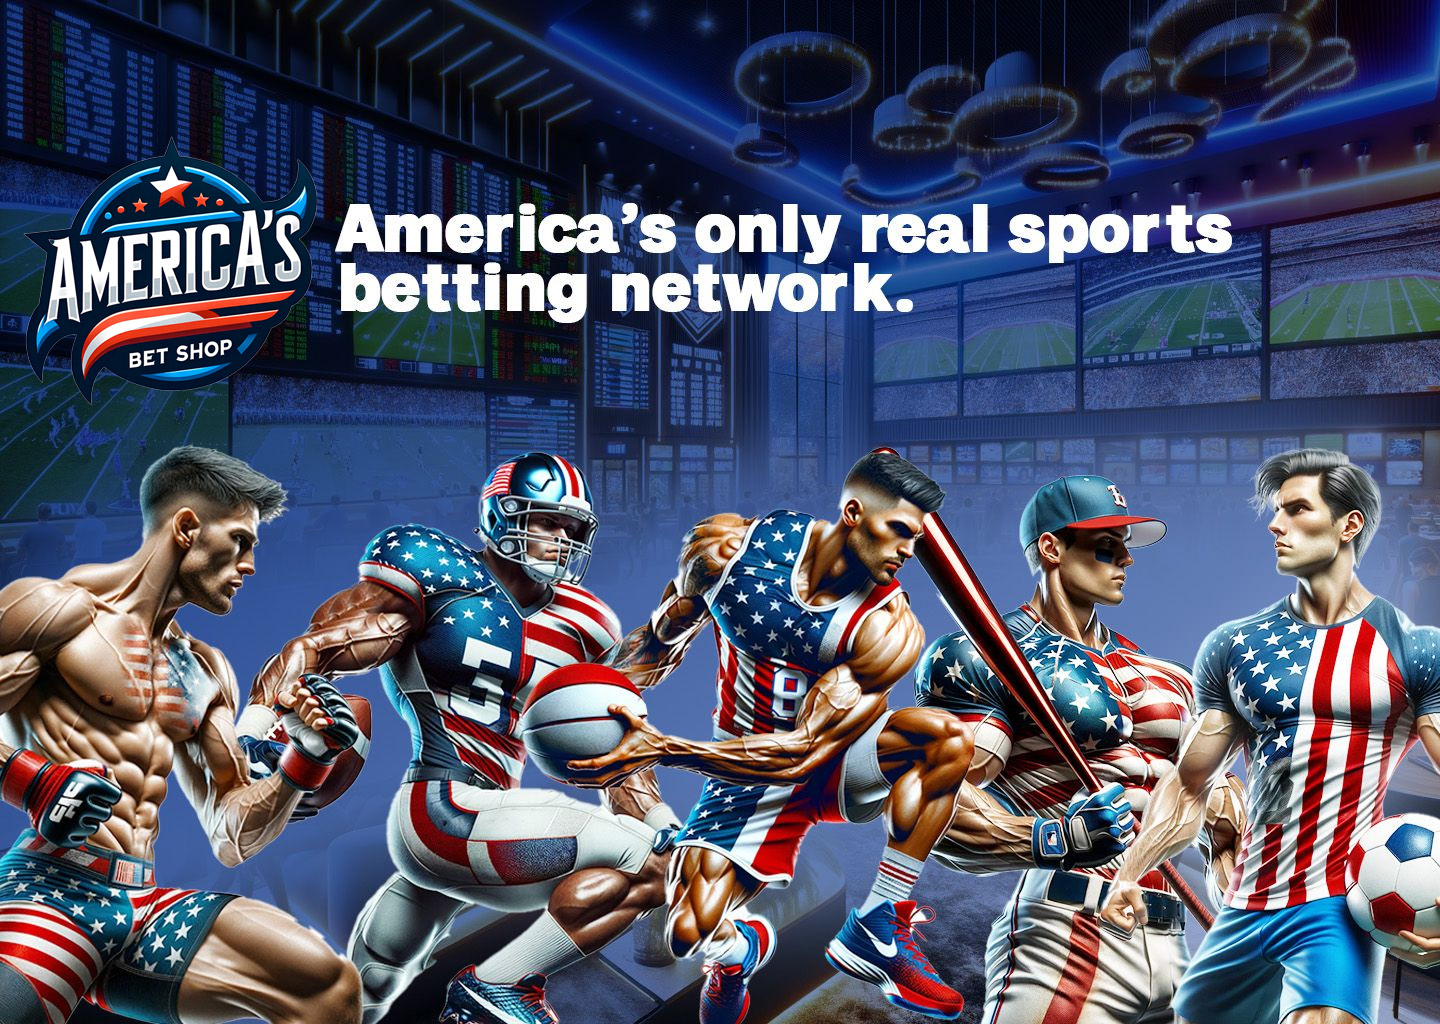 America's Bet Shop - AmericasBetShop.com Sports Betting for bars, pubs, barbershops, gas stations, retail shops